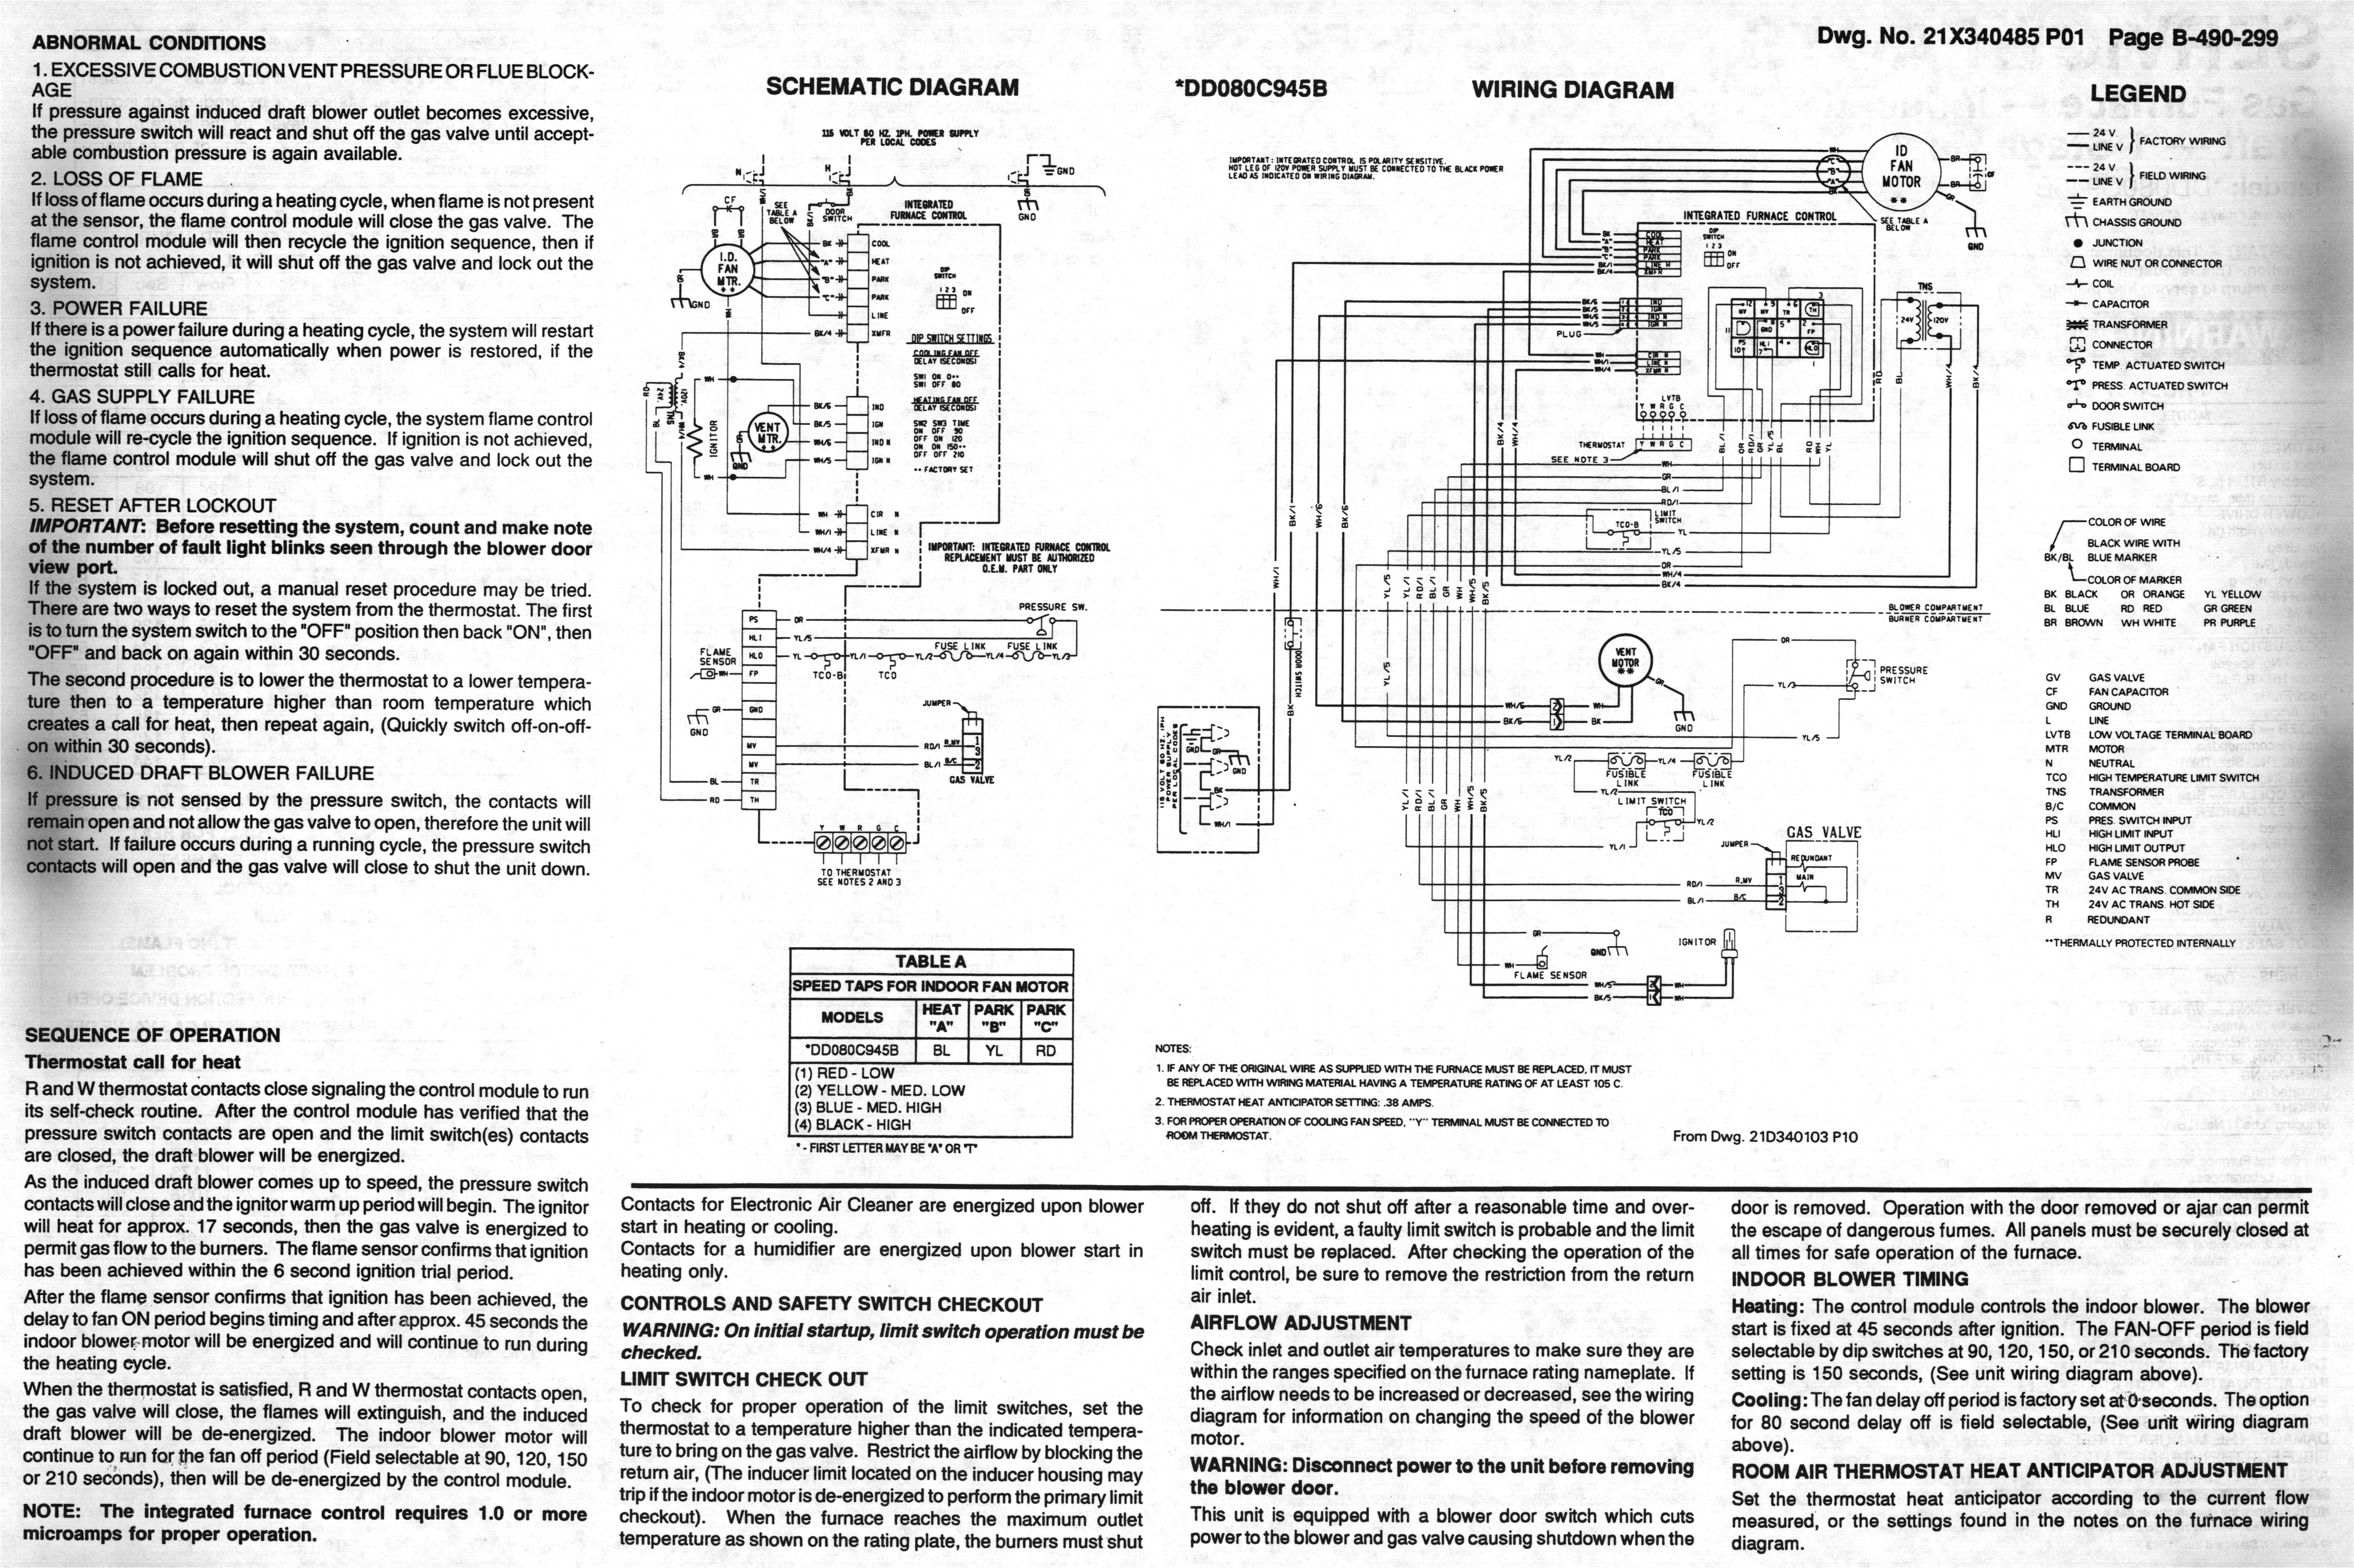 wiring diagram for the furnaces in question note that other diagrams trane electric furnace wiring diagram